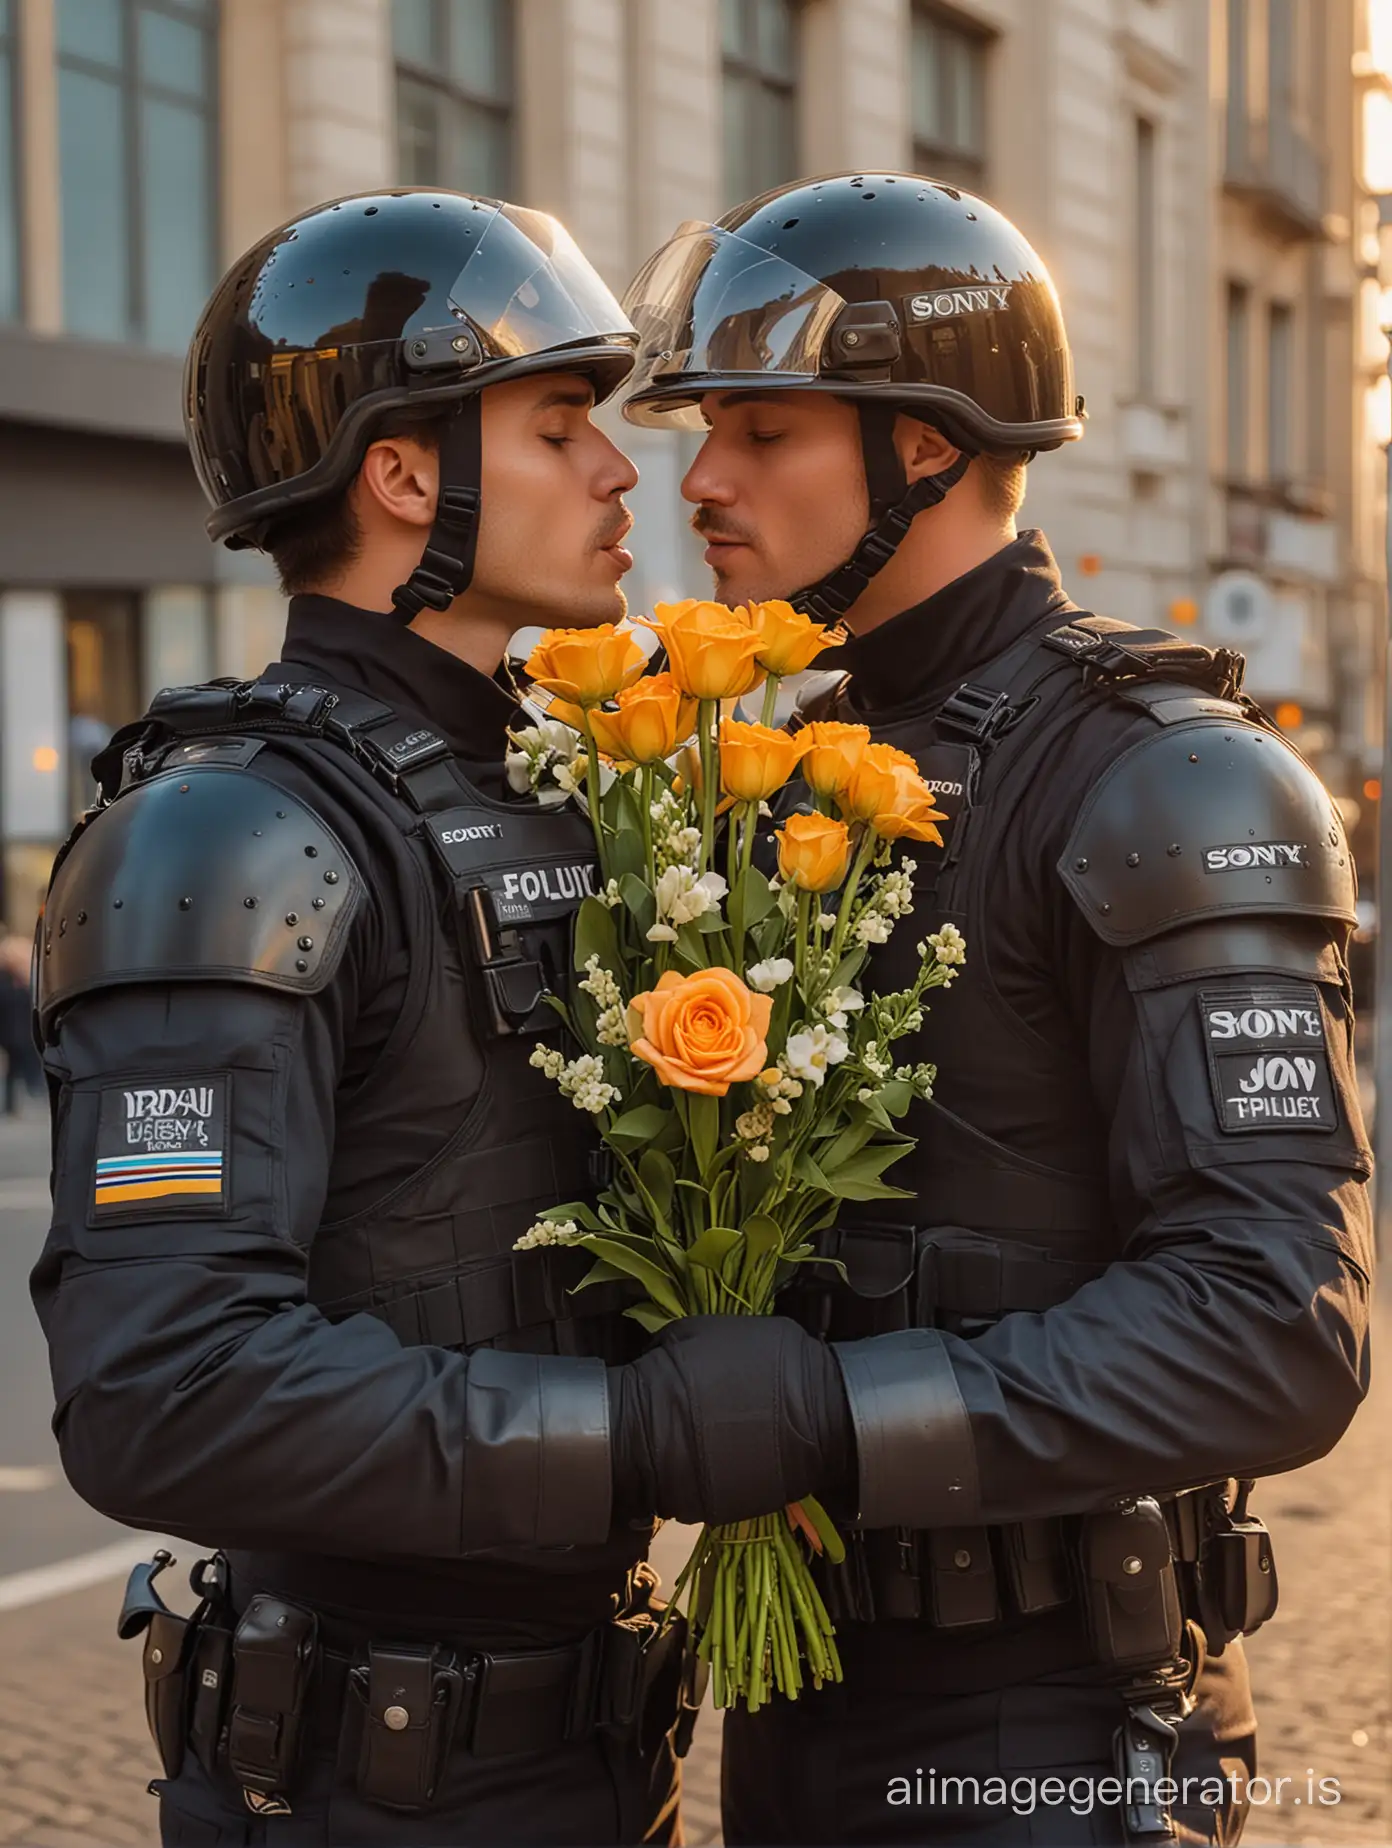 two policemen in riot gear kiss passionately, one of them has a bouquet of flowers in his hand. shot in the city taken with a latest model Sony camera, Golden Hour